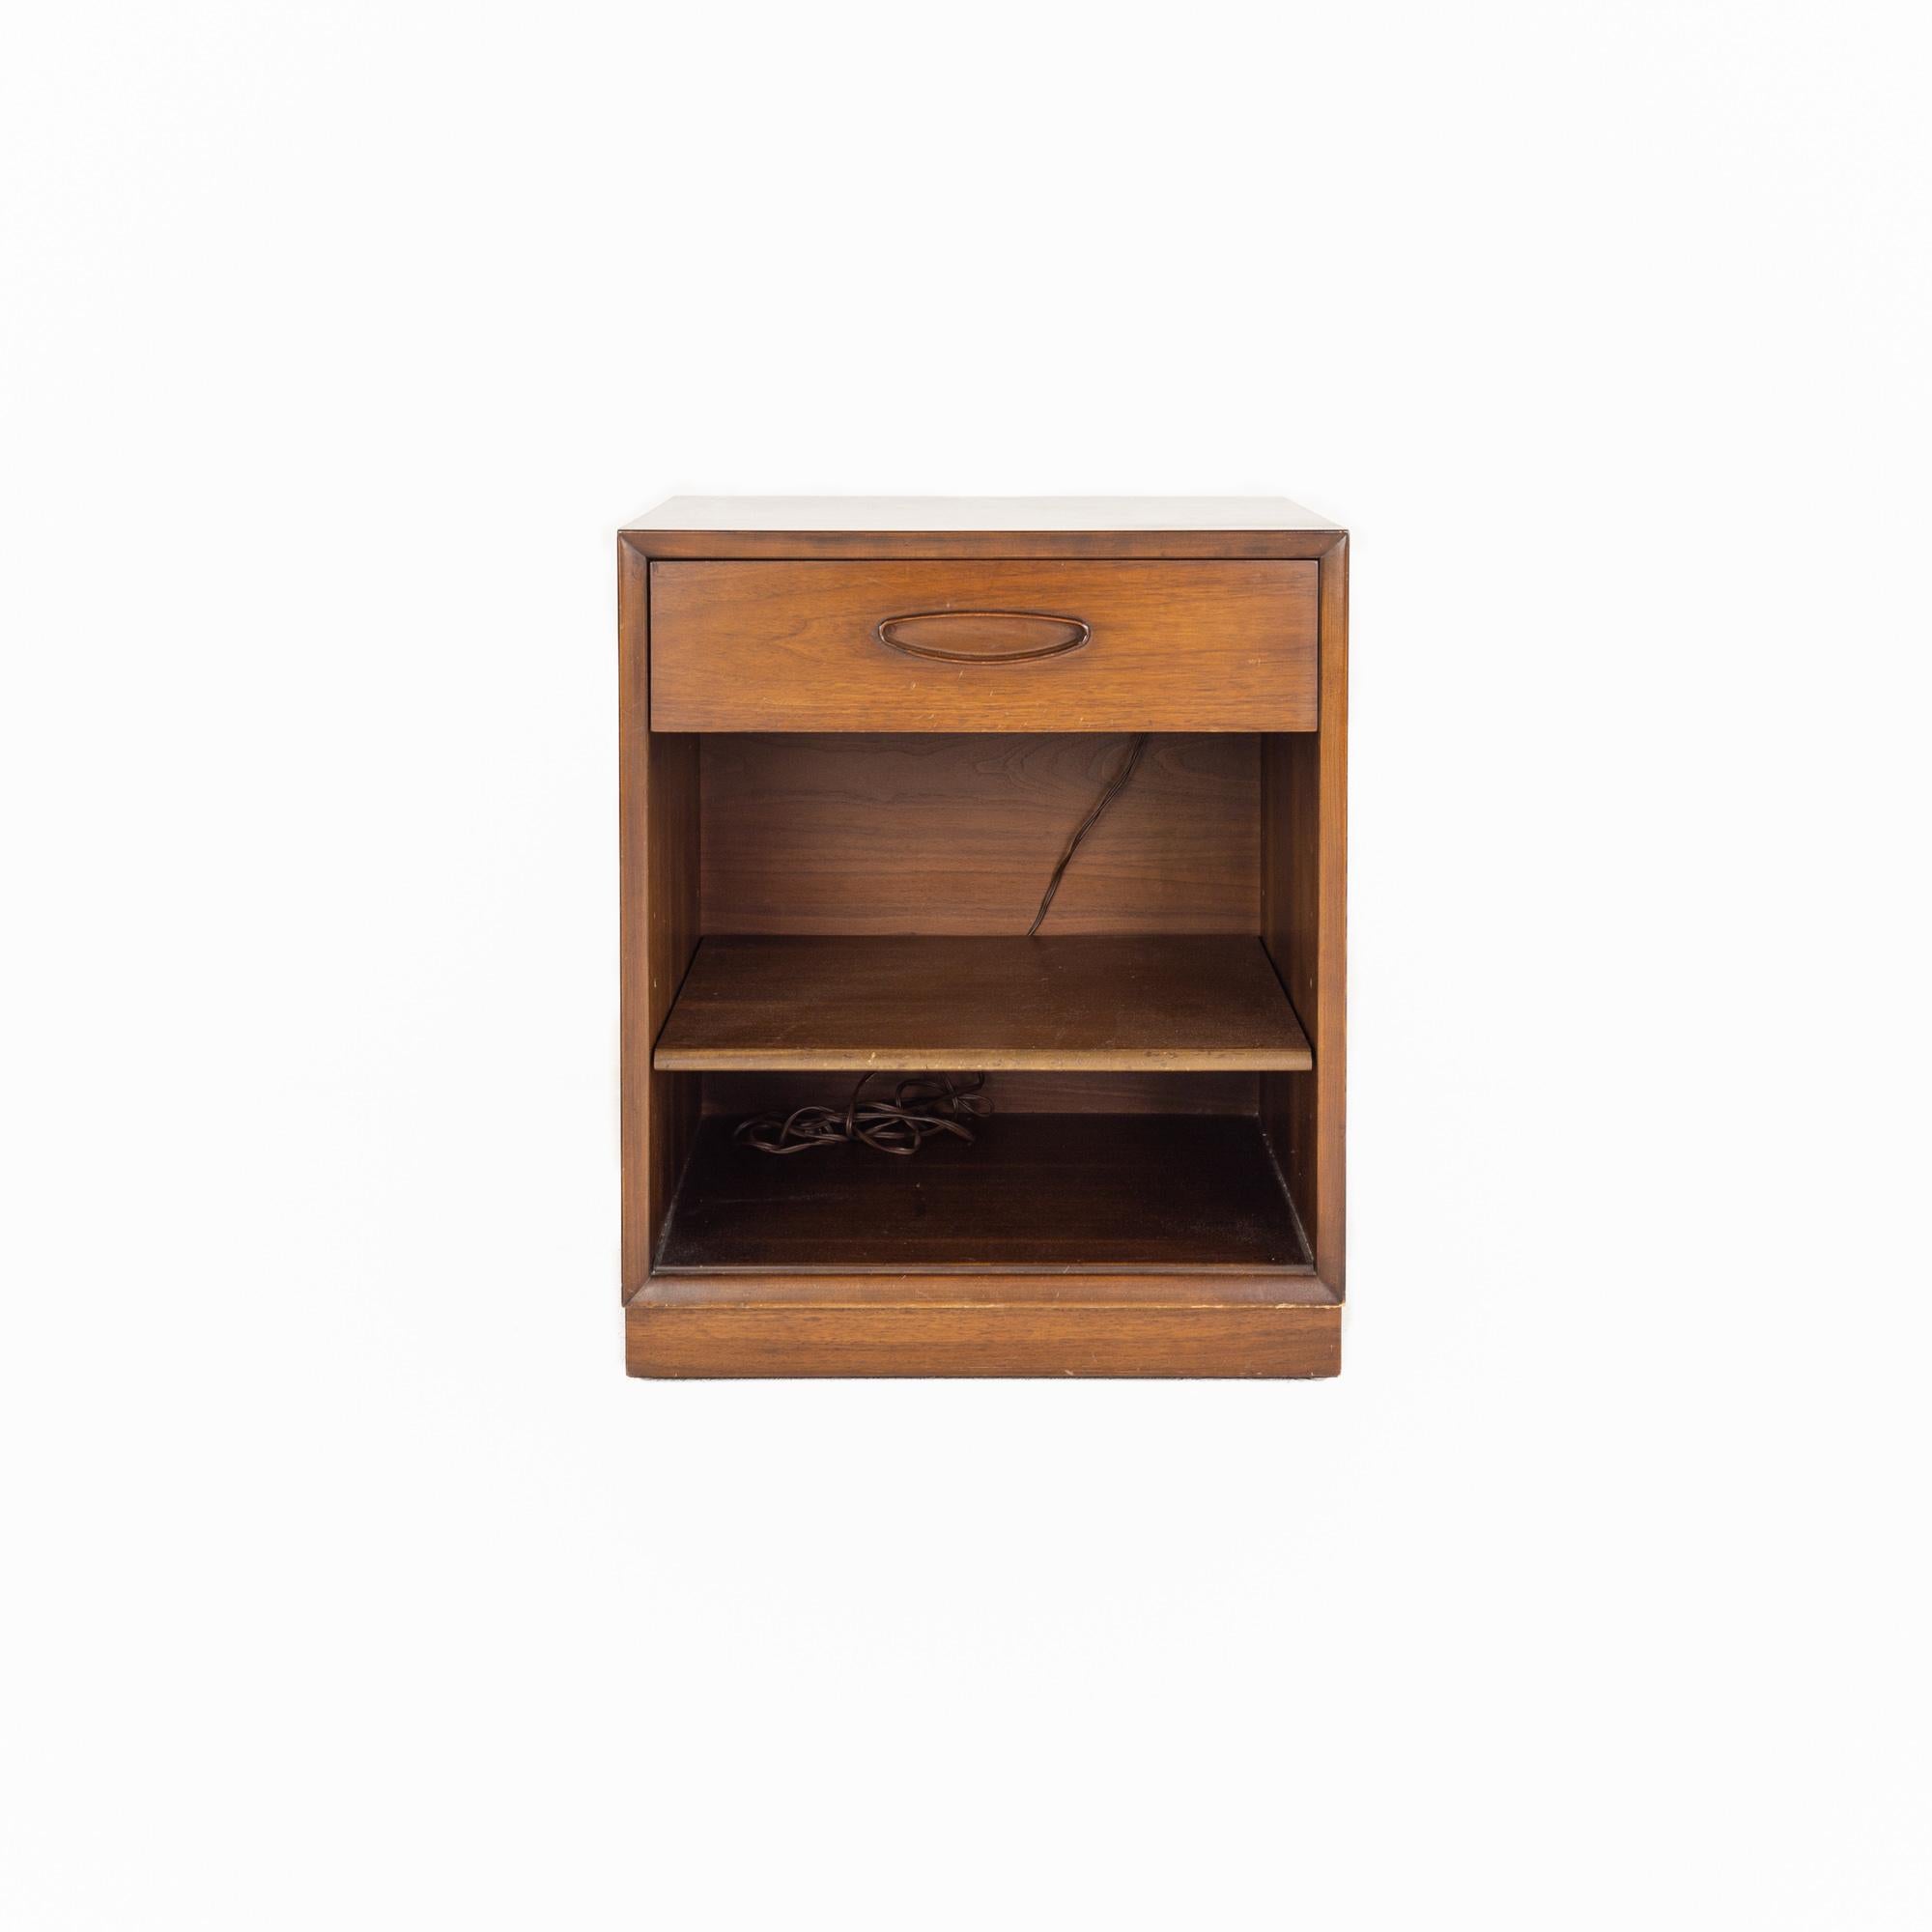 Henredon Circa 60' mid century walnut nightstand.

The nightstand measures: 21 wide x 17.5 deep x 25 inches high.

All pieces of furniture can be had in what we call restored vintage condition. That means the piece is restored upon purchase so